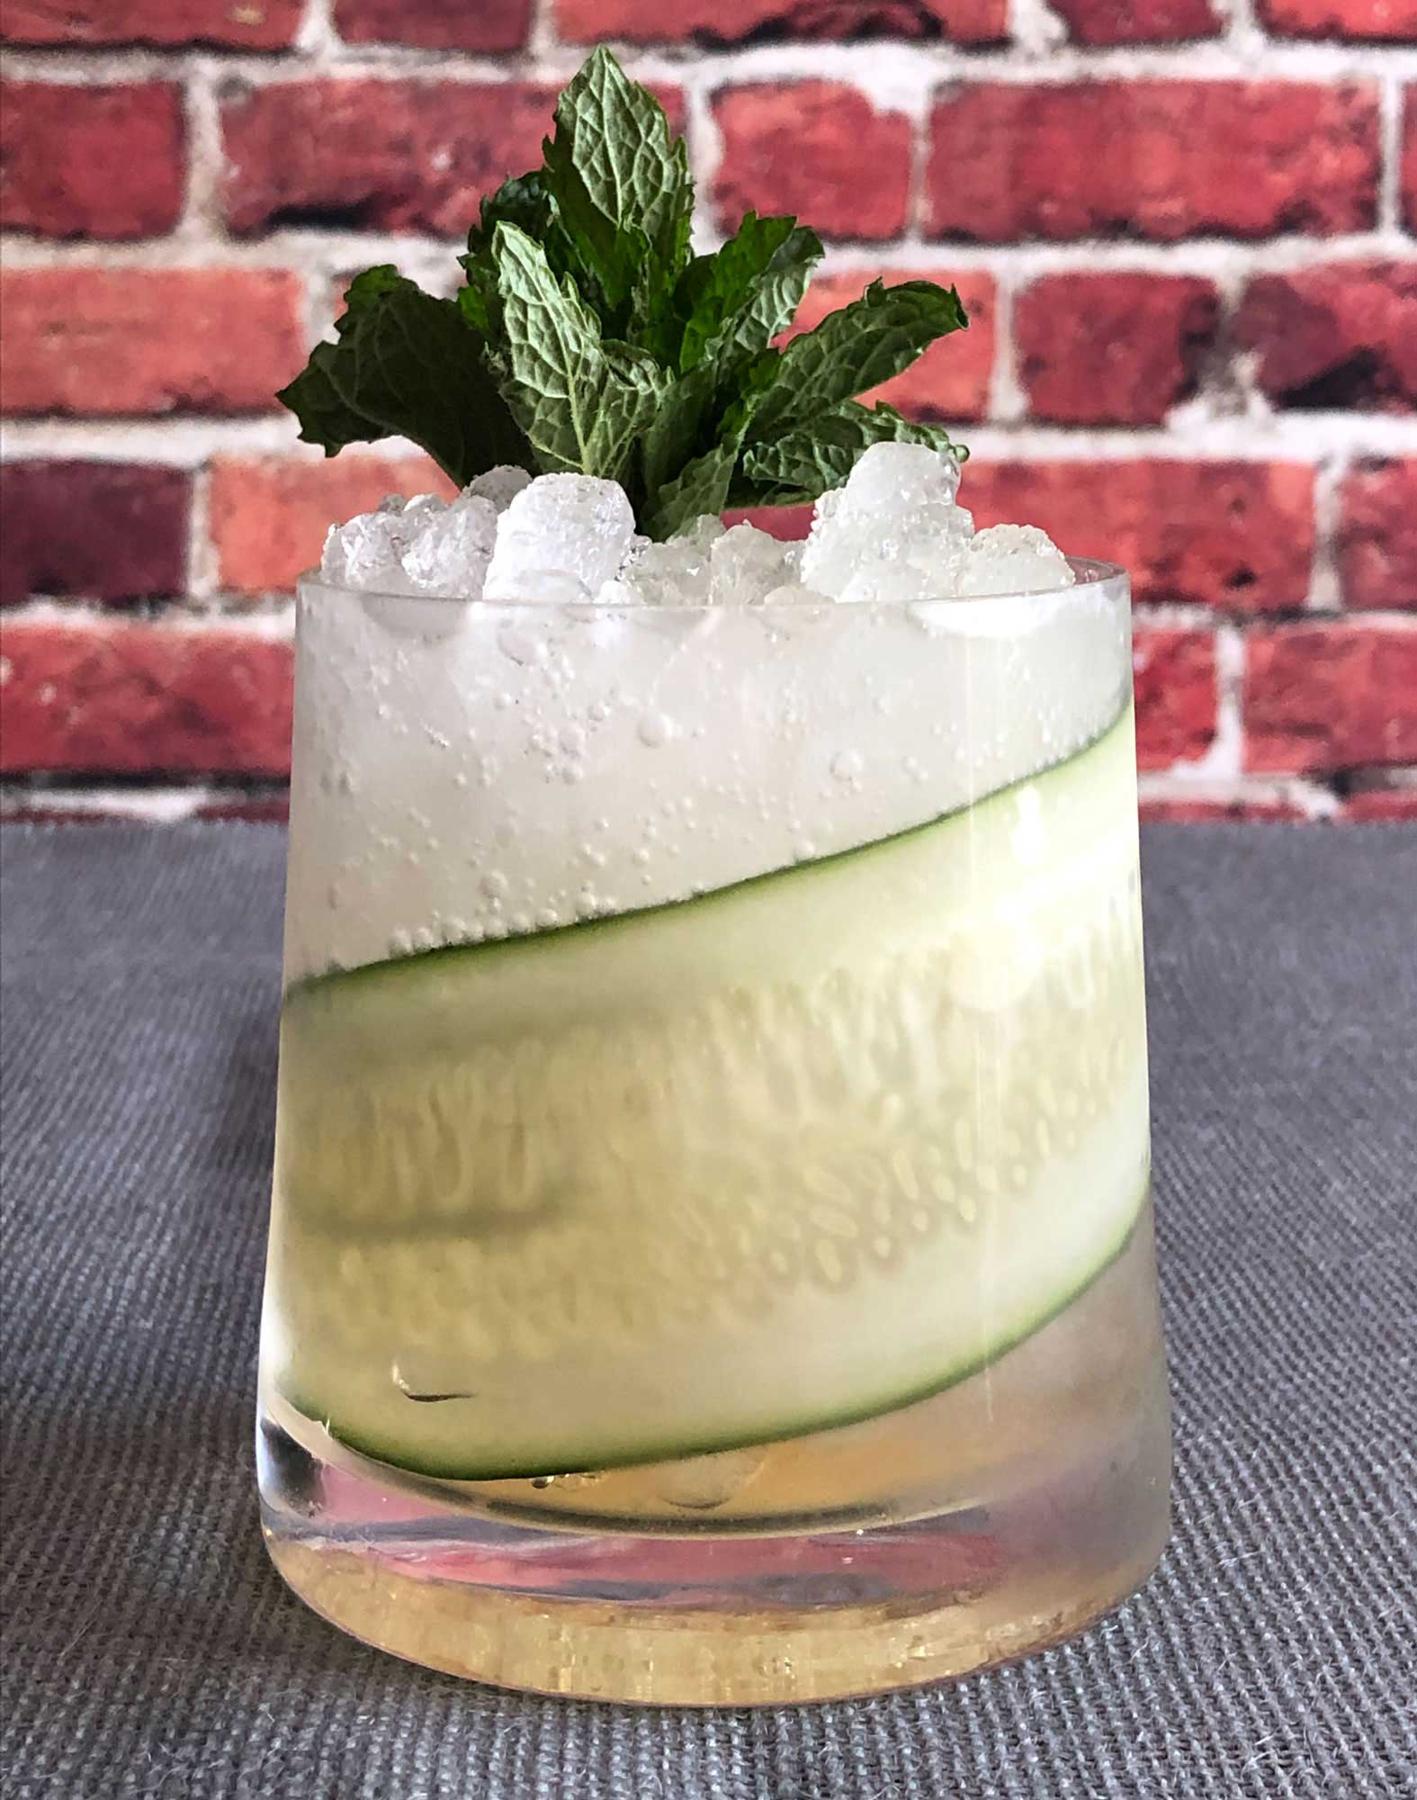 An example of the Capri Classic, the mixed drink (drink), by Macchialina, Miami Beach, Florida, featuring Cocchi Americano Bianco, soda water, sprig of mint, and cucumber slice; photo by Lee Edwards